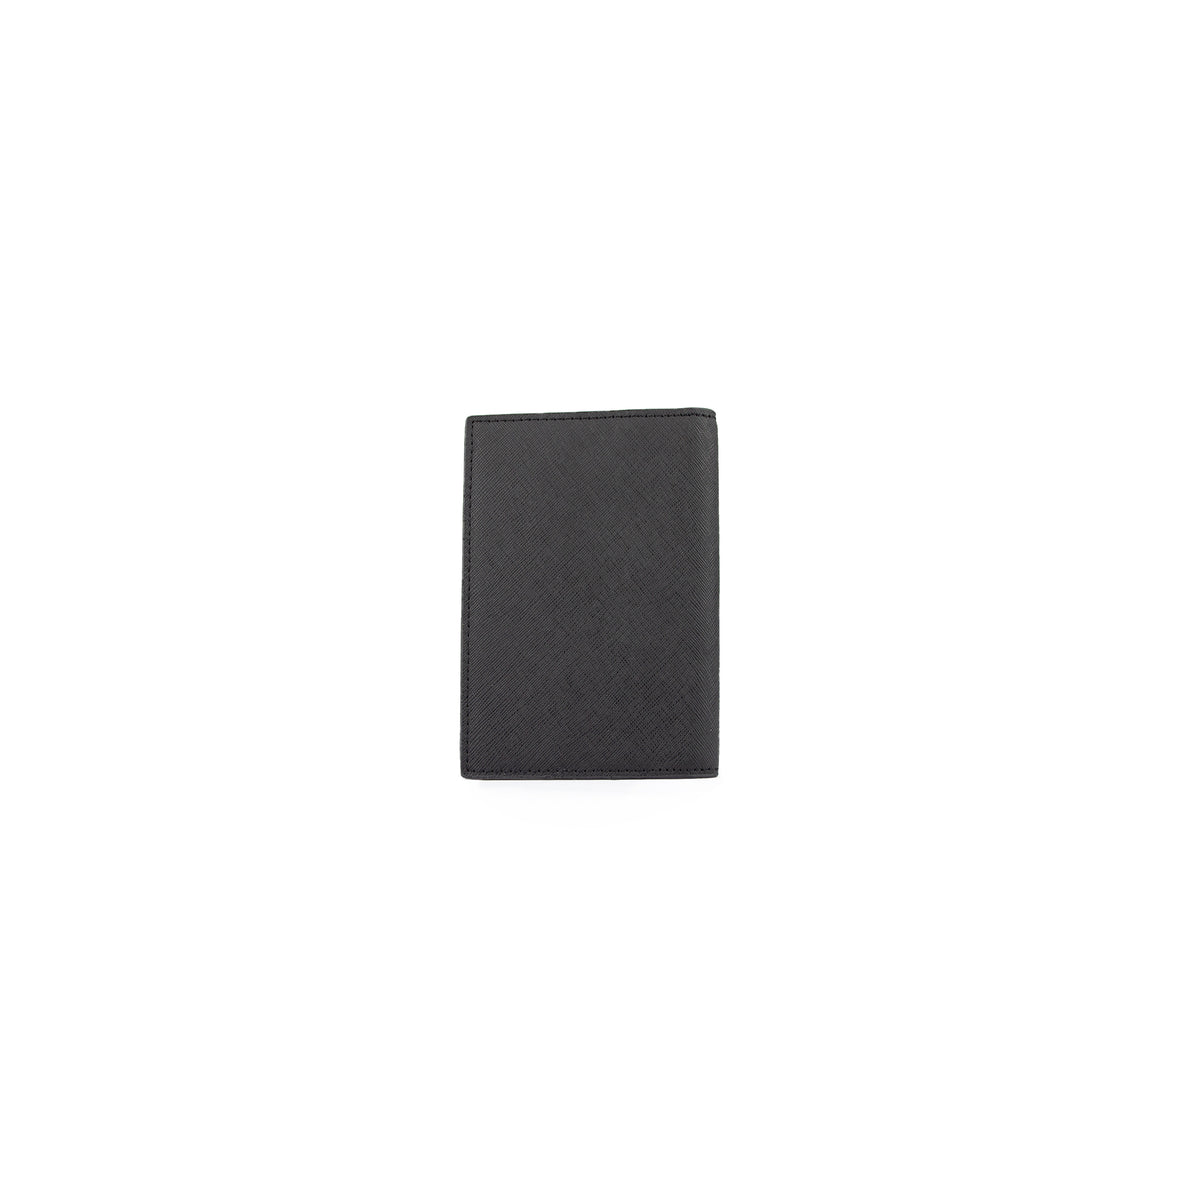 Personalised Passport Cover - Black Saffiano Leather